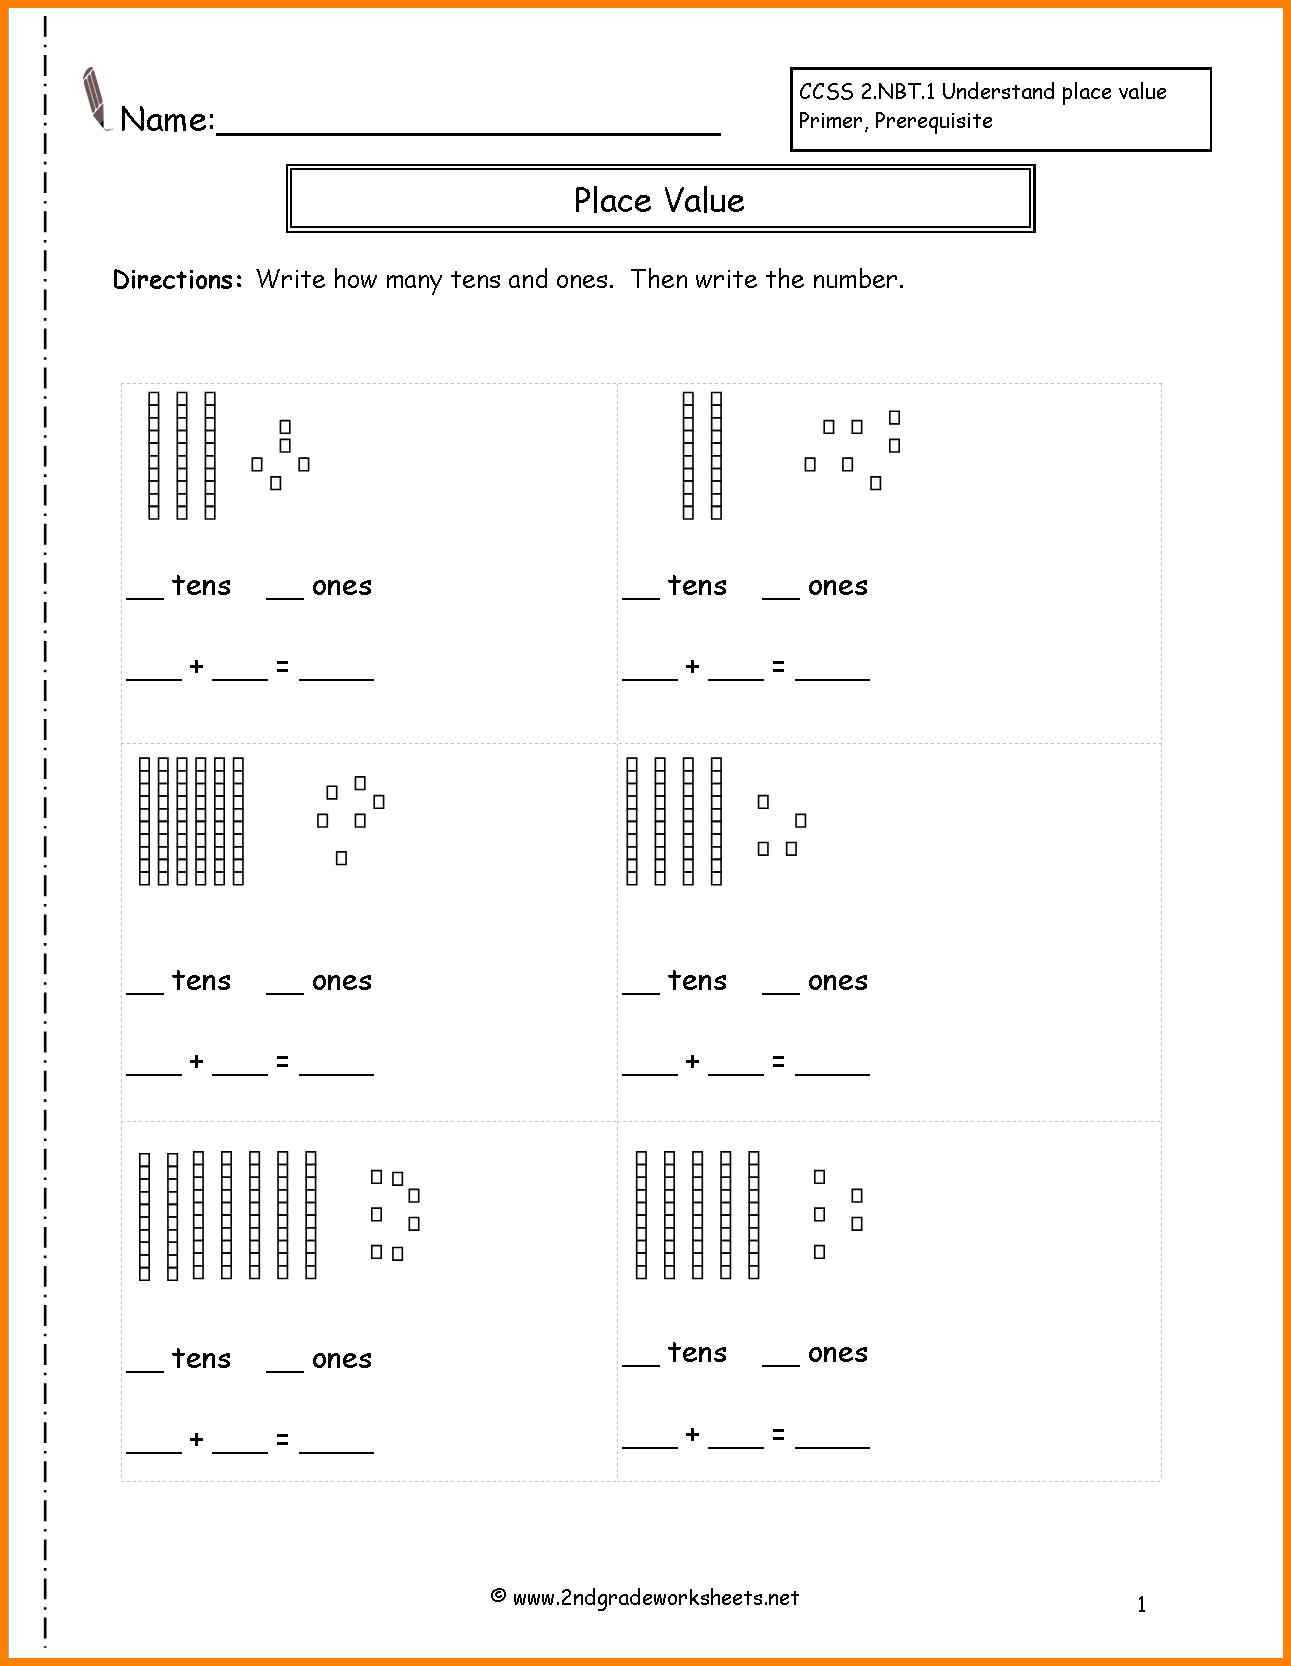 English to Metric Conversion Worksheet as Well as Place Value Blocks Worksheets Placevalue7